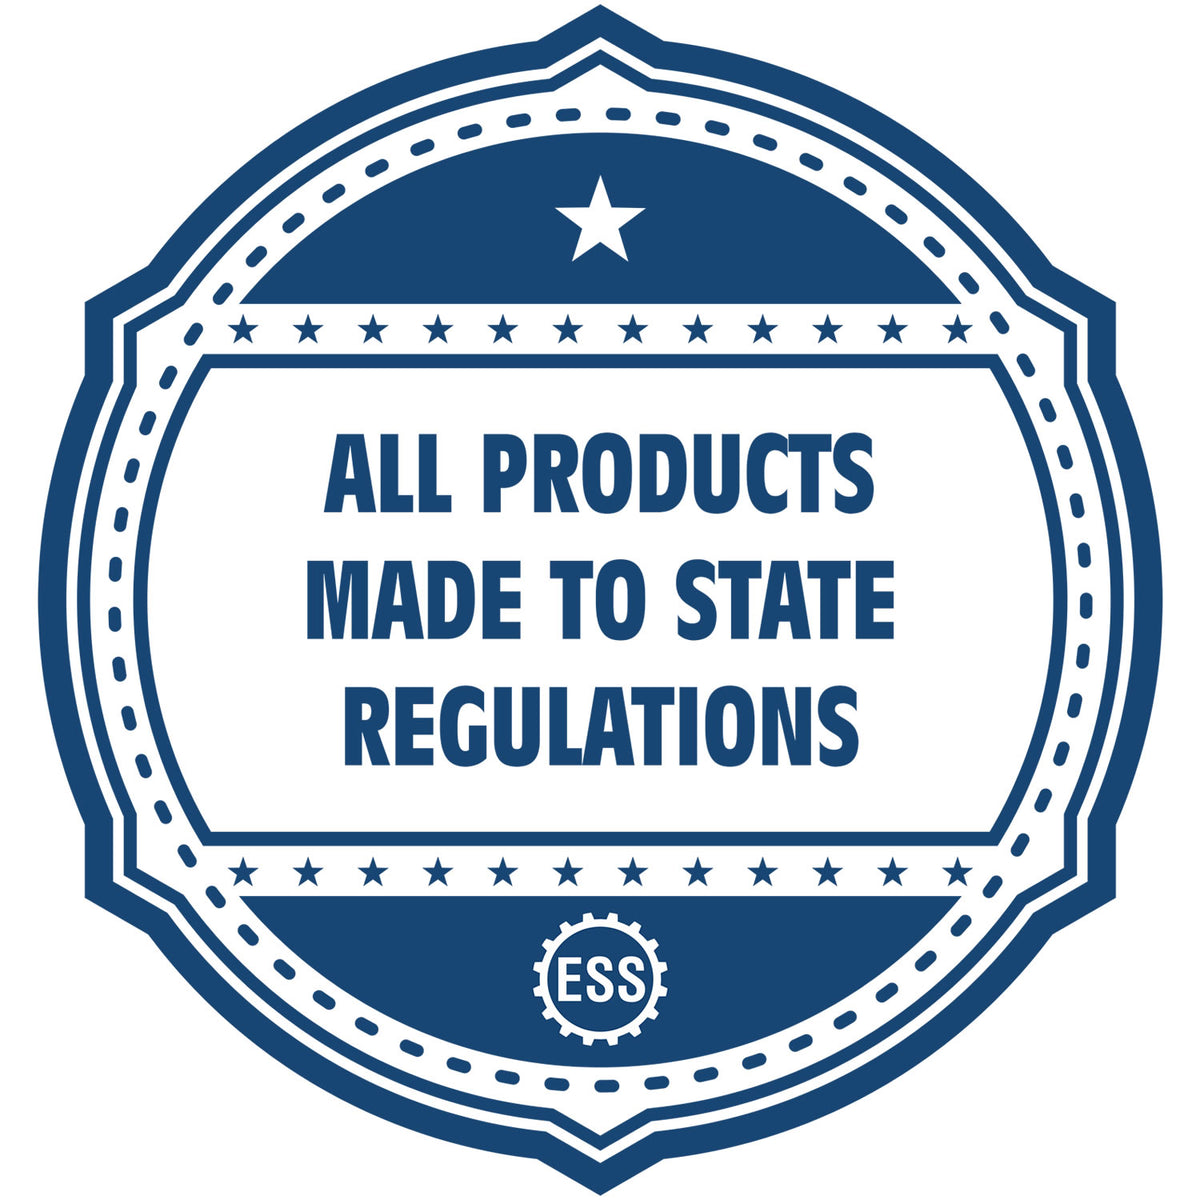 A blue icon or badge for the Slim Pre-Inked Pennsylvania Professional Geologist Seal Stamp showing that this product is made in compliance with state regulations.